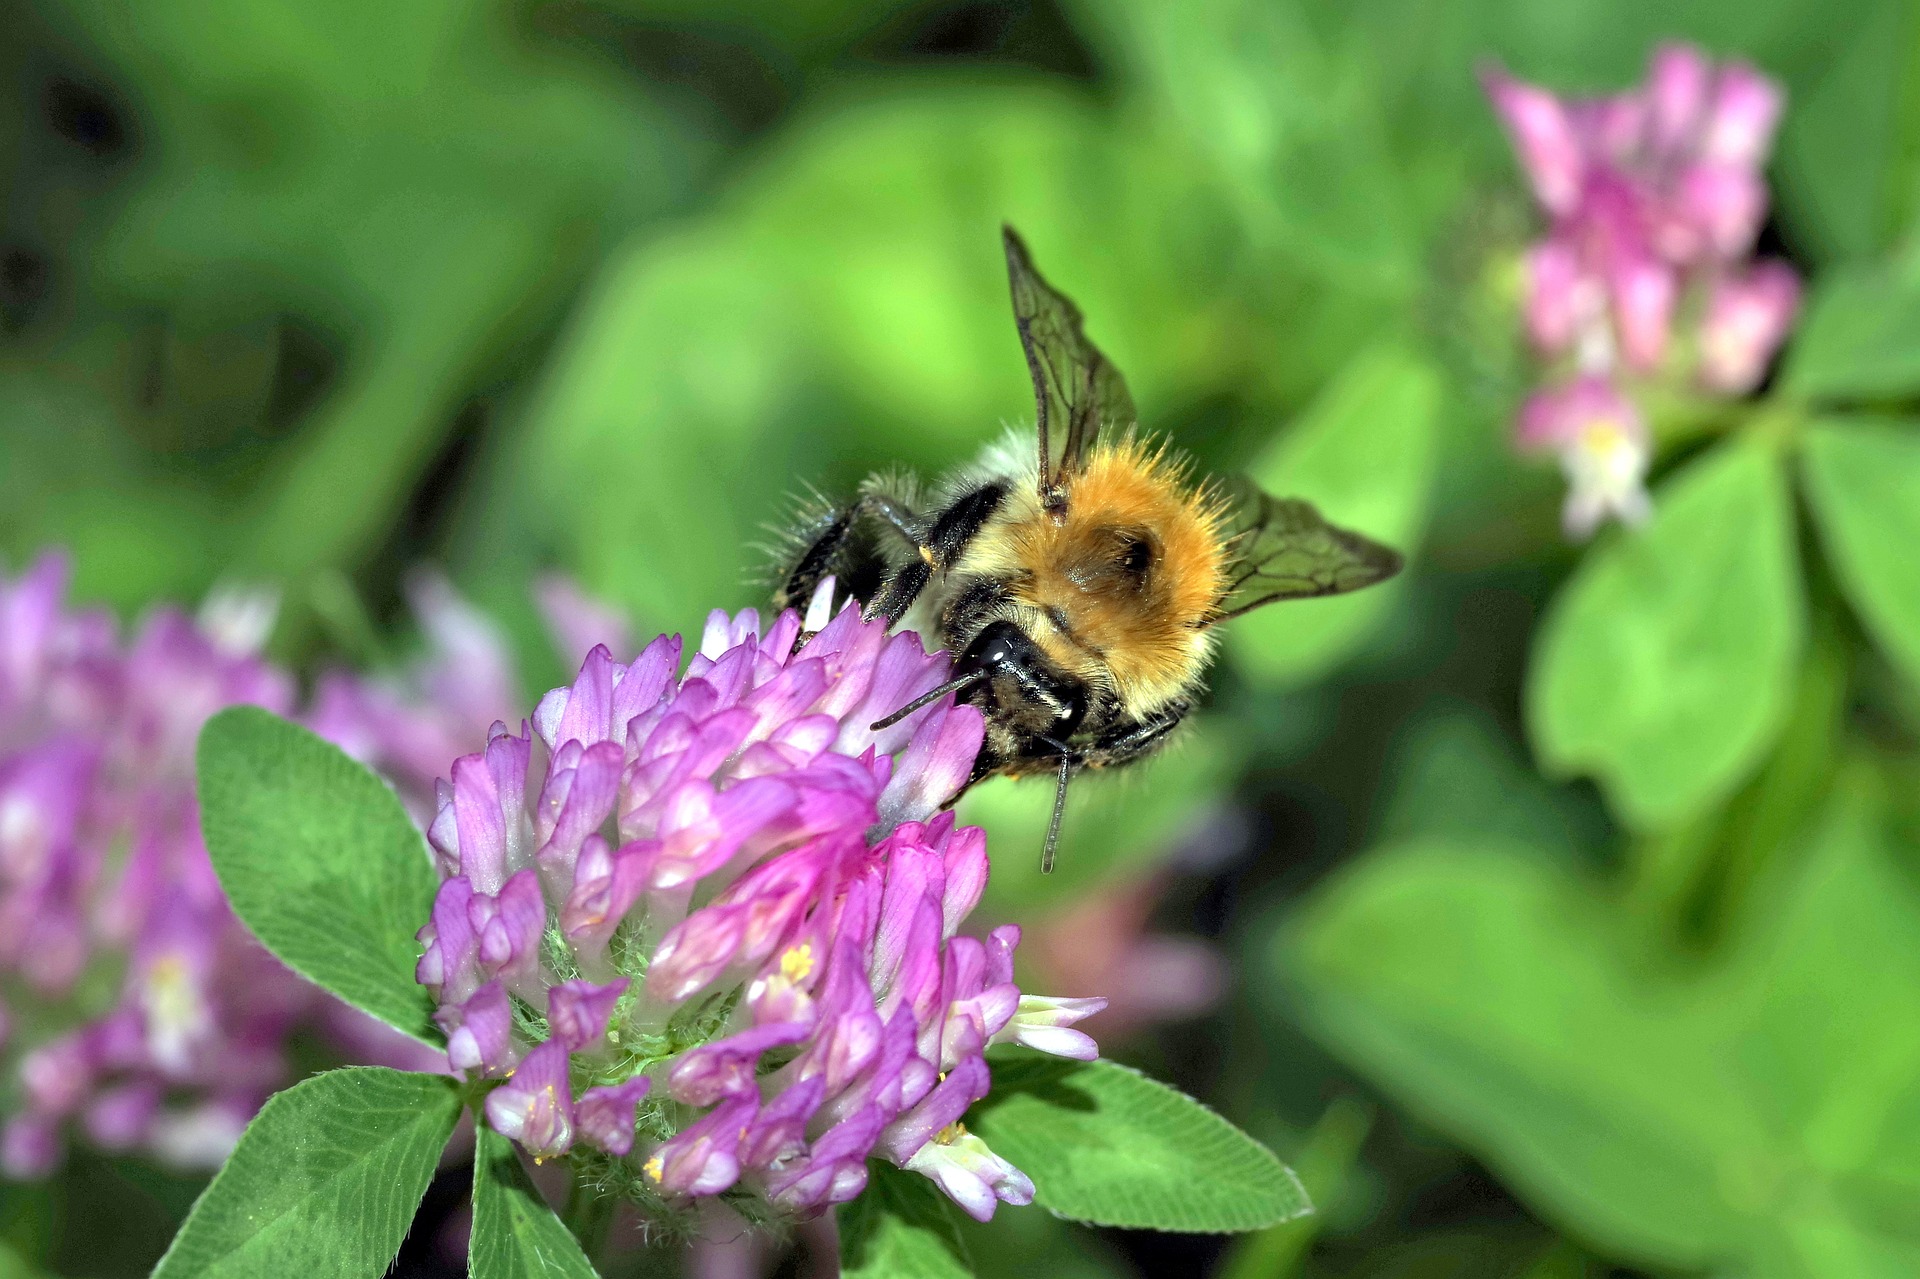 Bumblebee on a red clover blossom